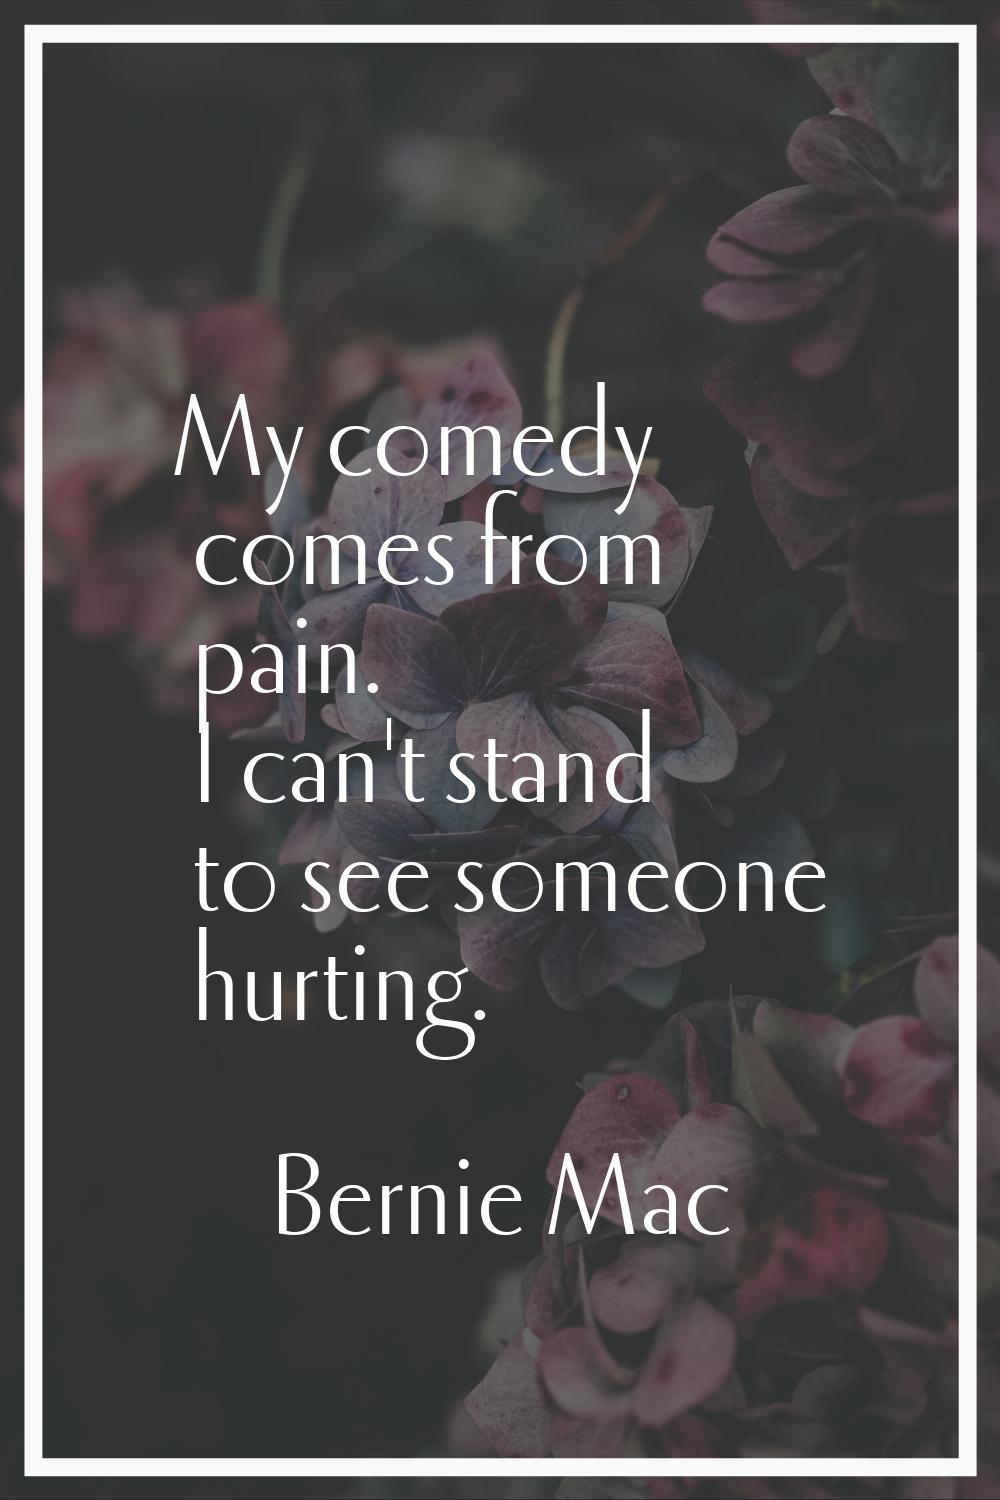 My comedy comes from pain. I can't stand to see someone hurting.